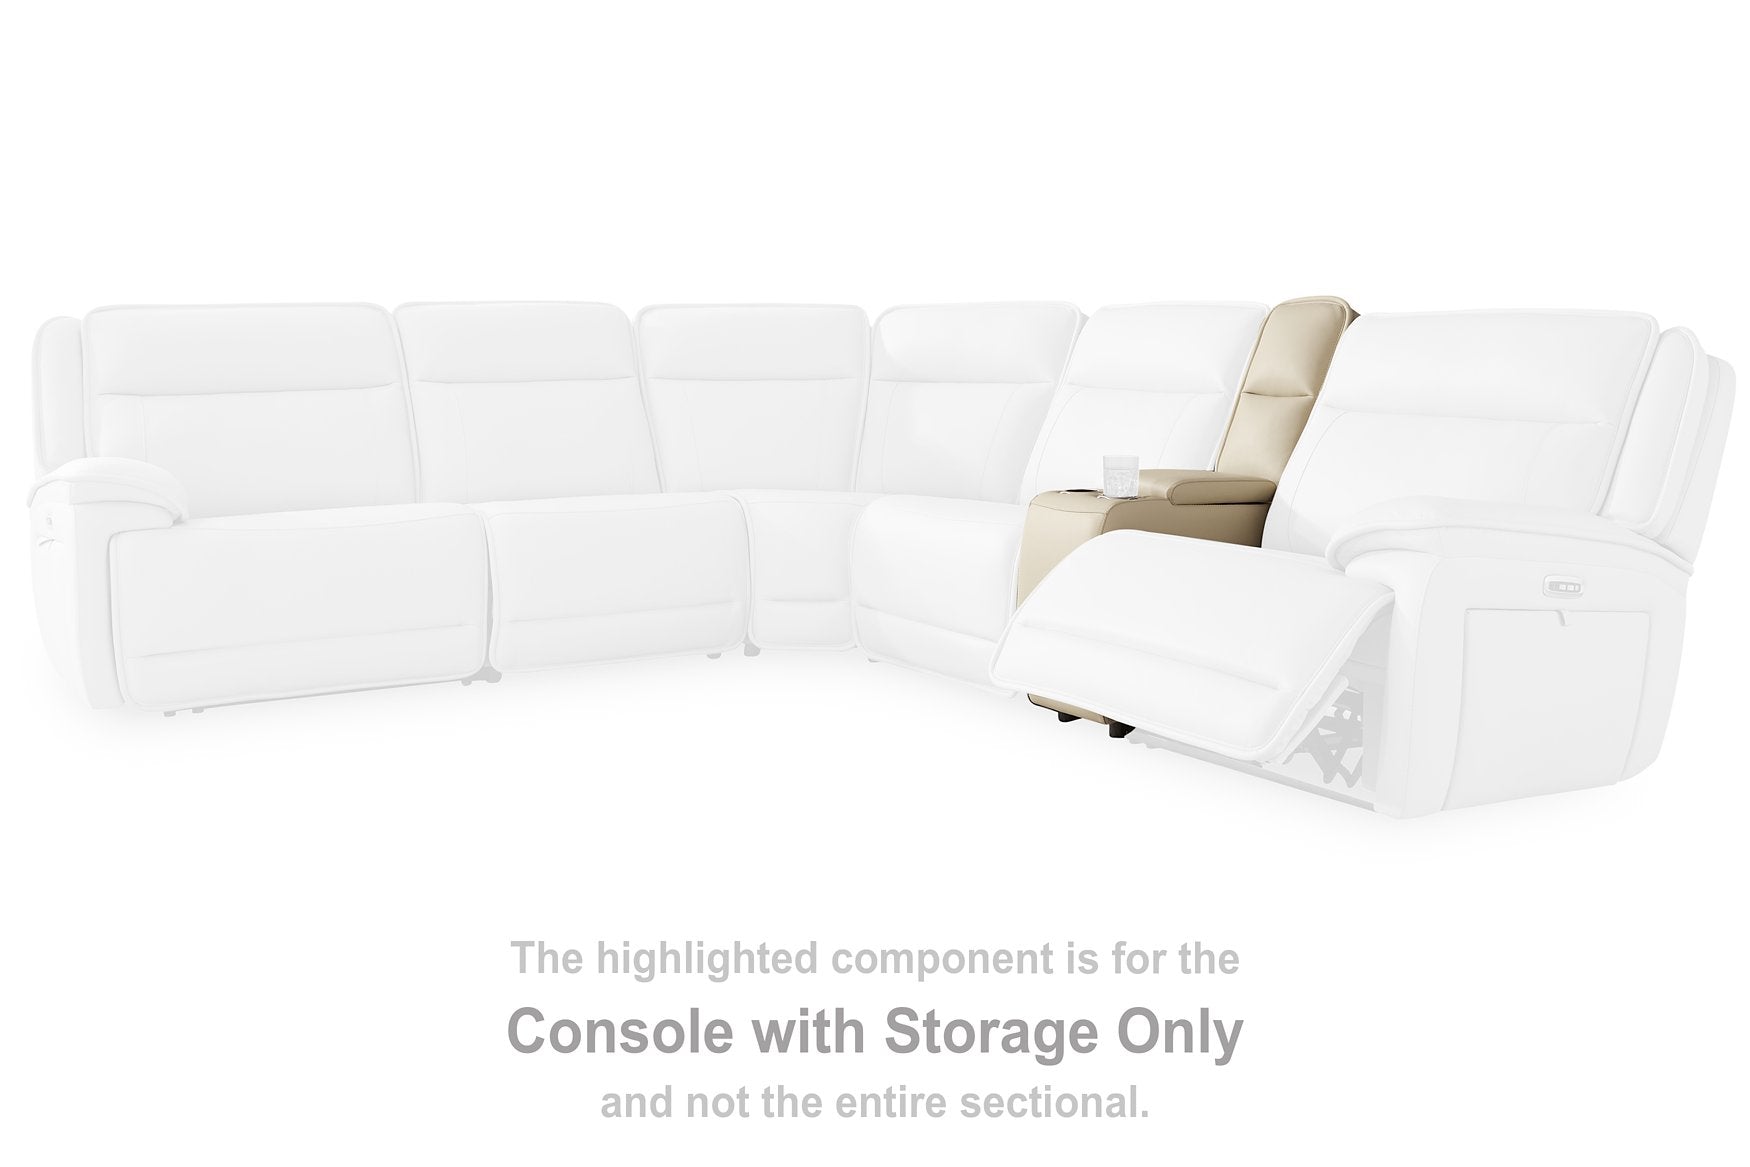 Double Deal Power Reclining Loveseat Sectional with Console